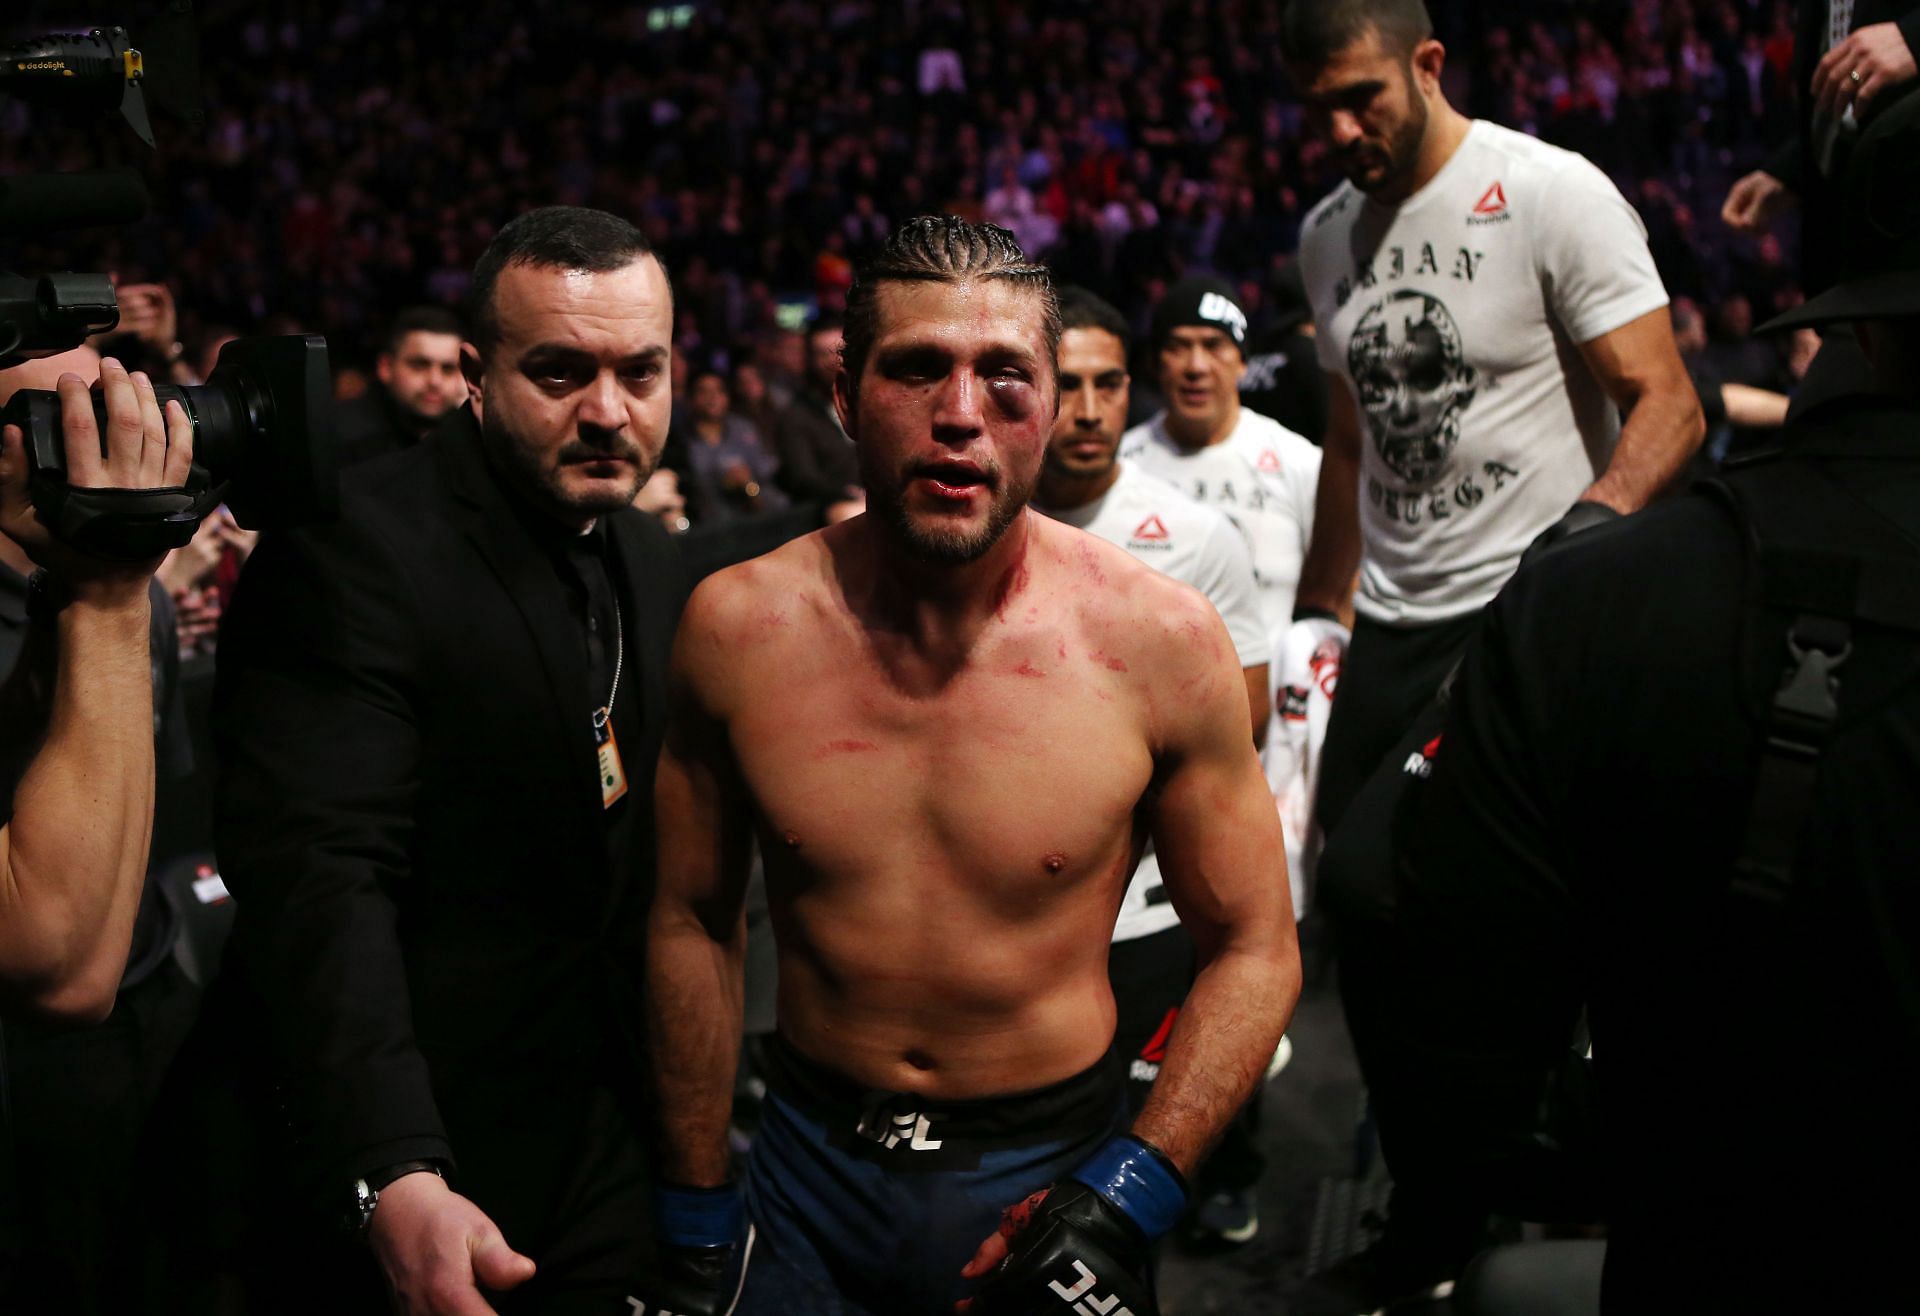 Brian Ortega after losing at UFC 231 [Images via Getty]